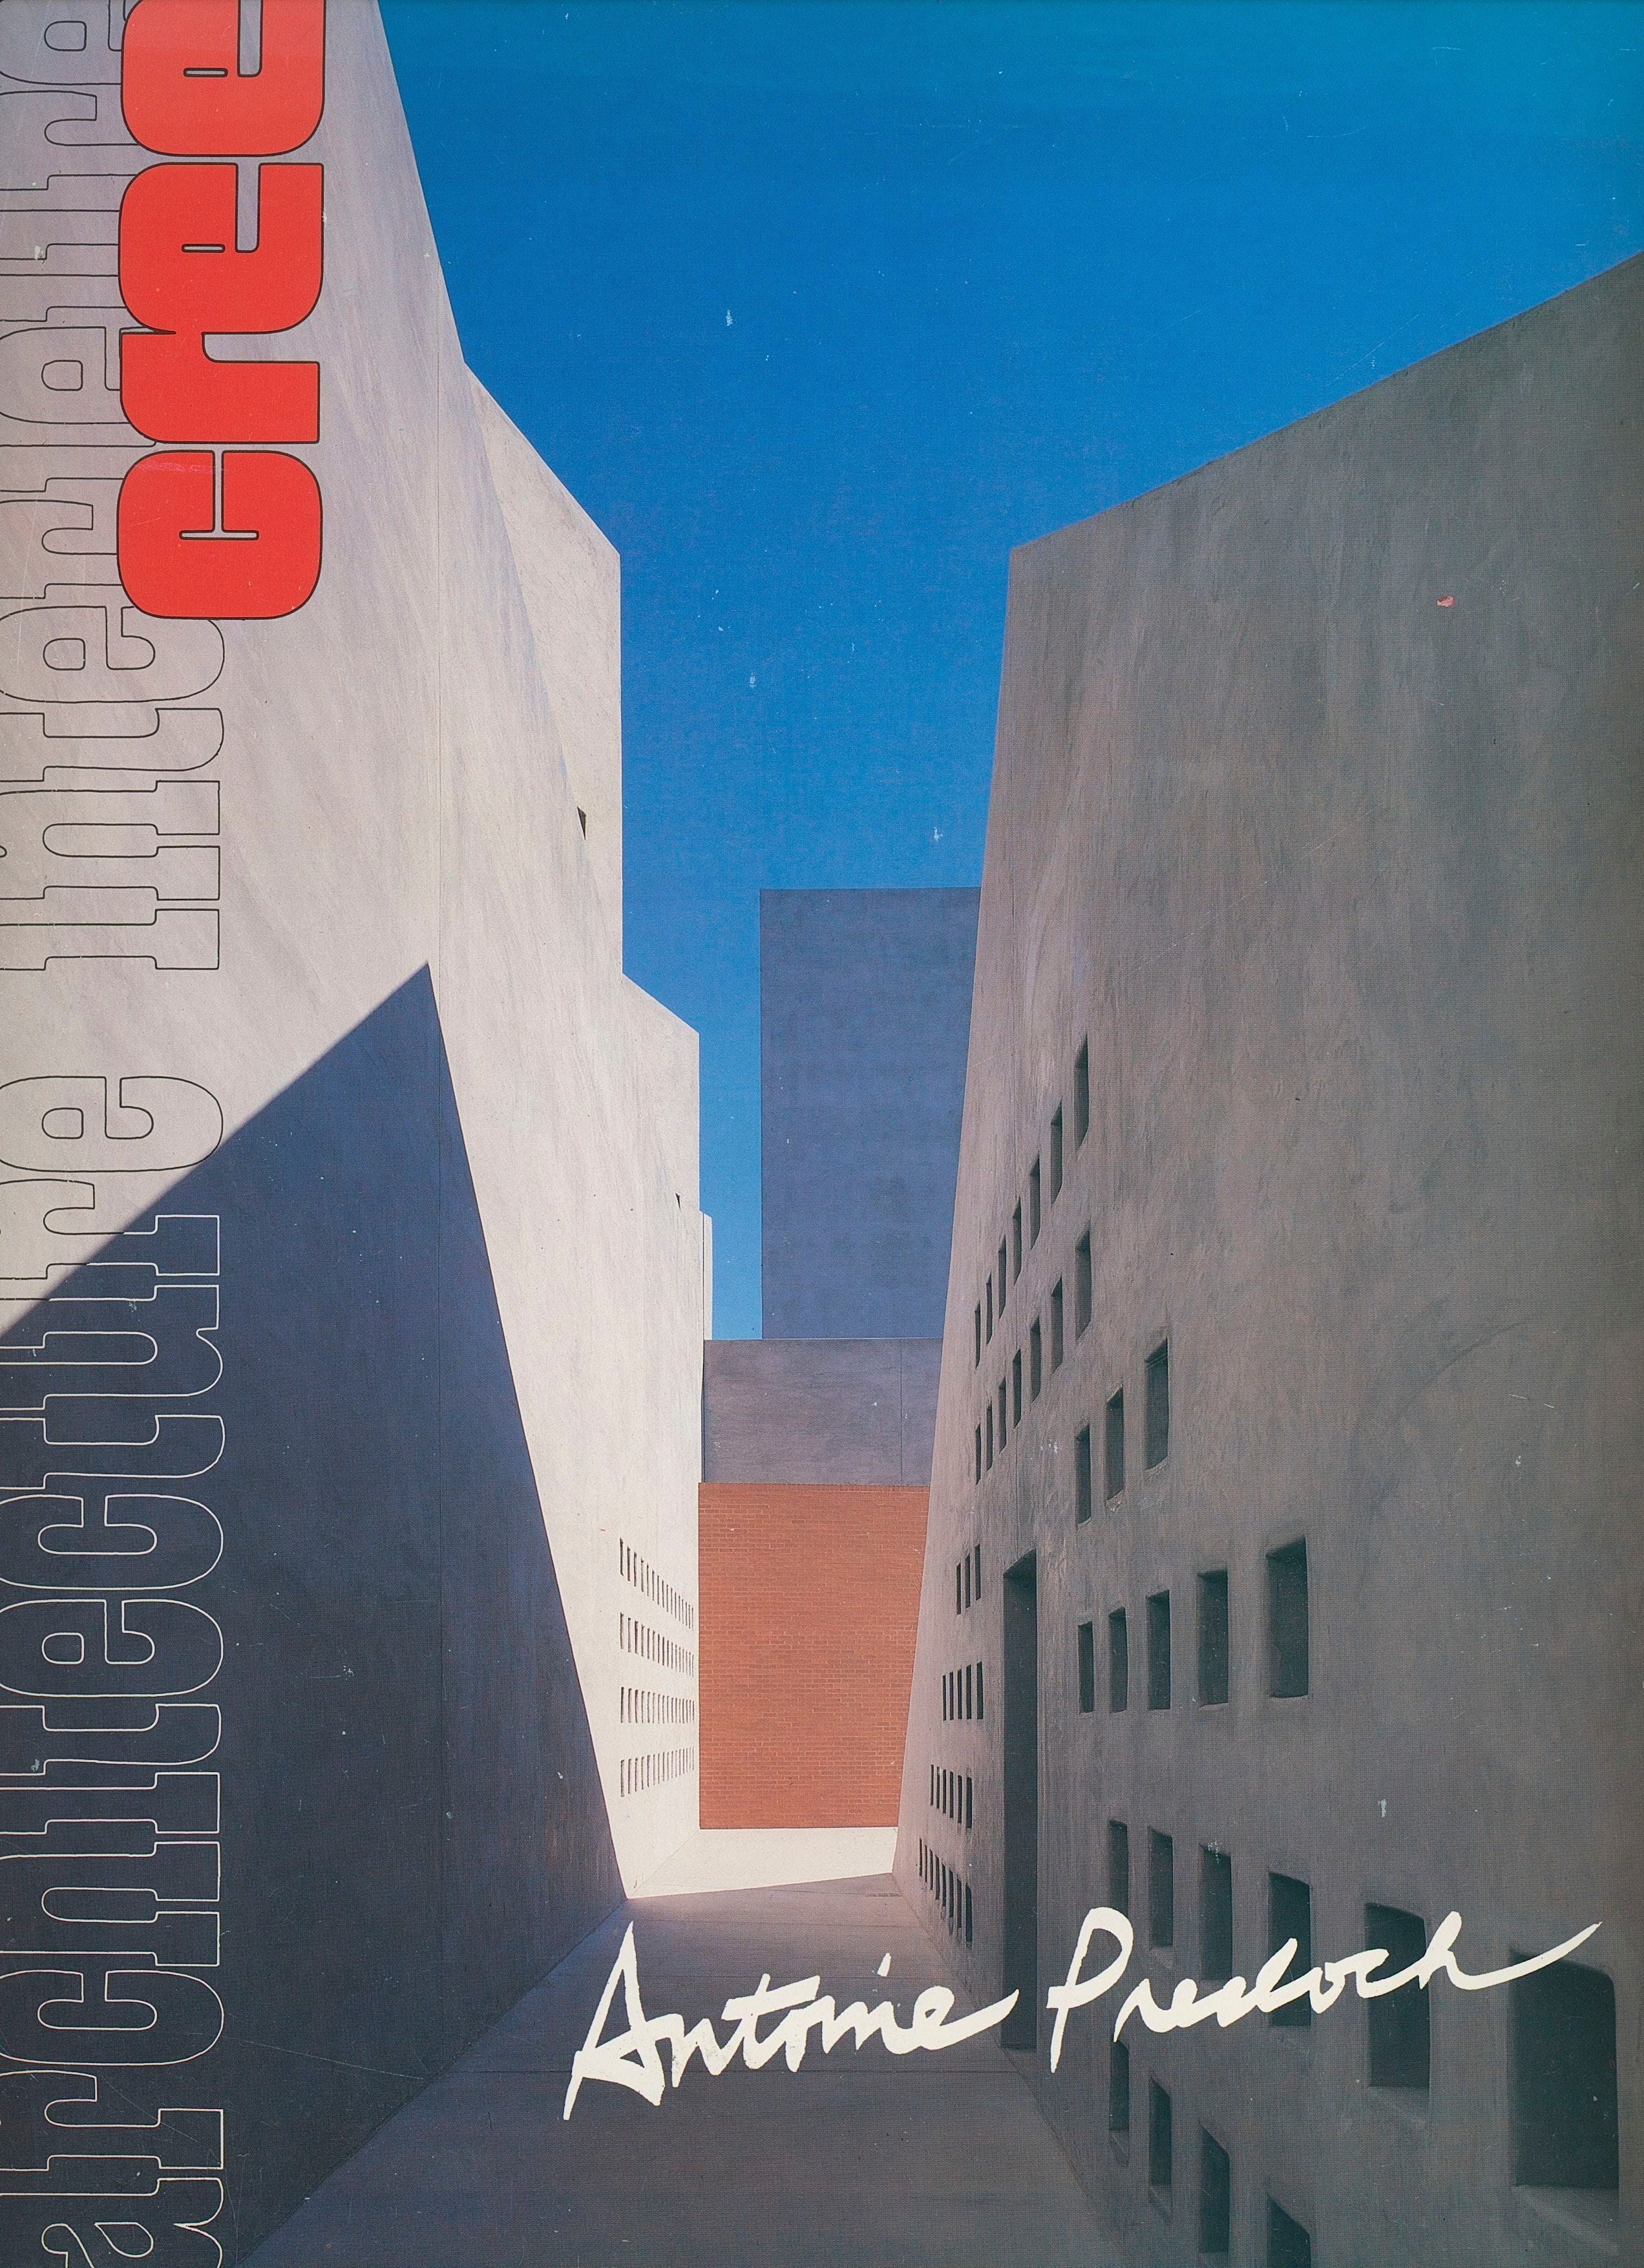 Reprint by the architect Antoine Predock of the portrait and Interview by Claudine Mulard, published by Archi Créé n° 233 (Dec1989/Jan1990)